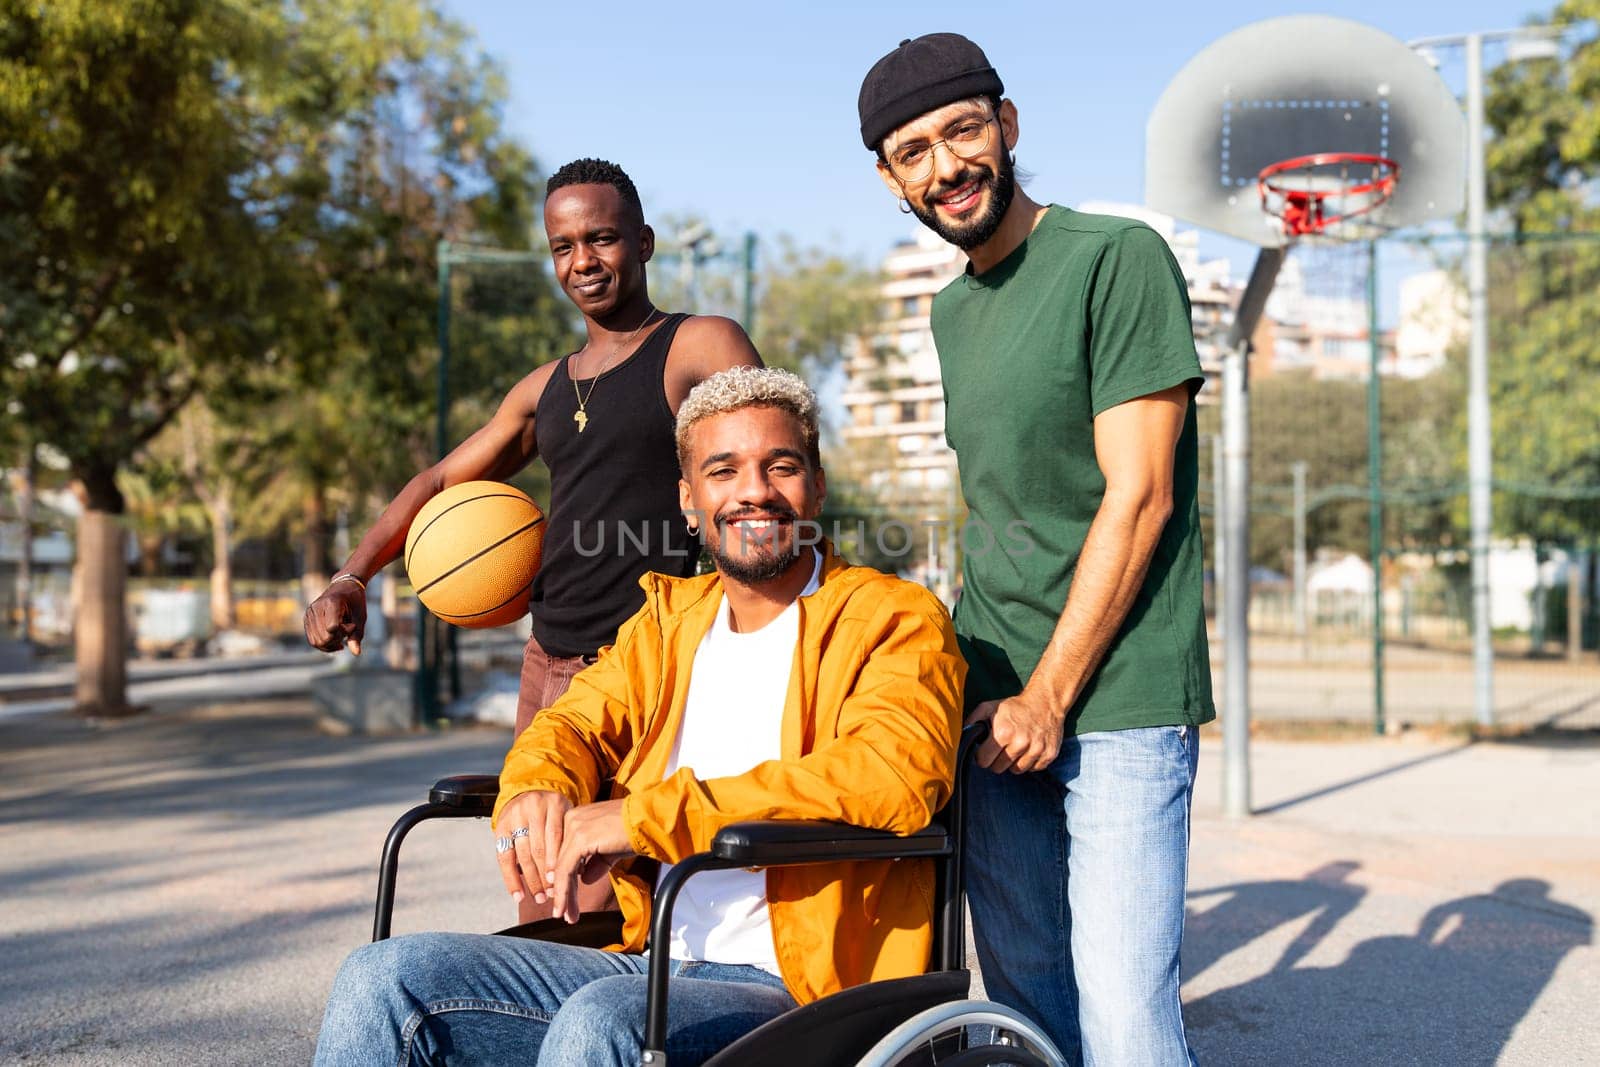 Happy young African American man in a wheelchair with friends in basketball court outdoors looking at camera smiling. Sports and friendship concept.